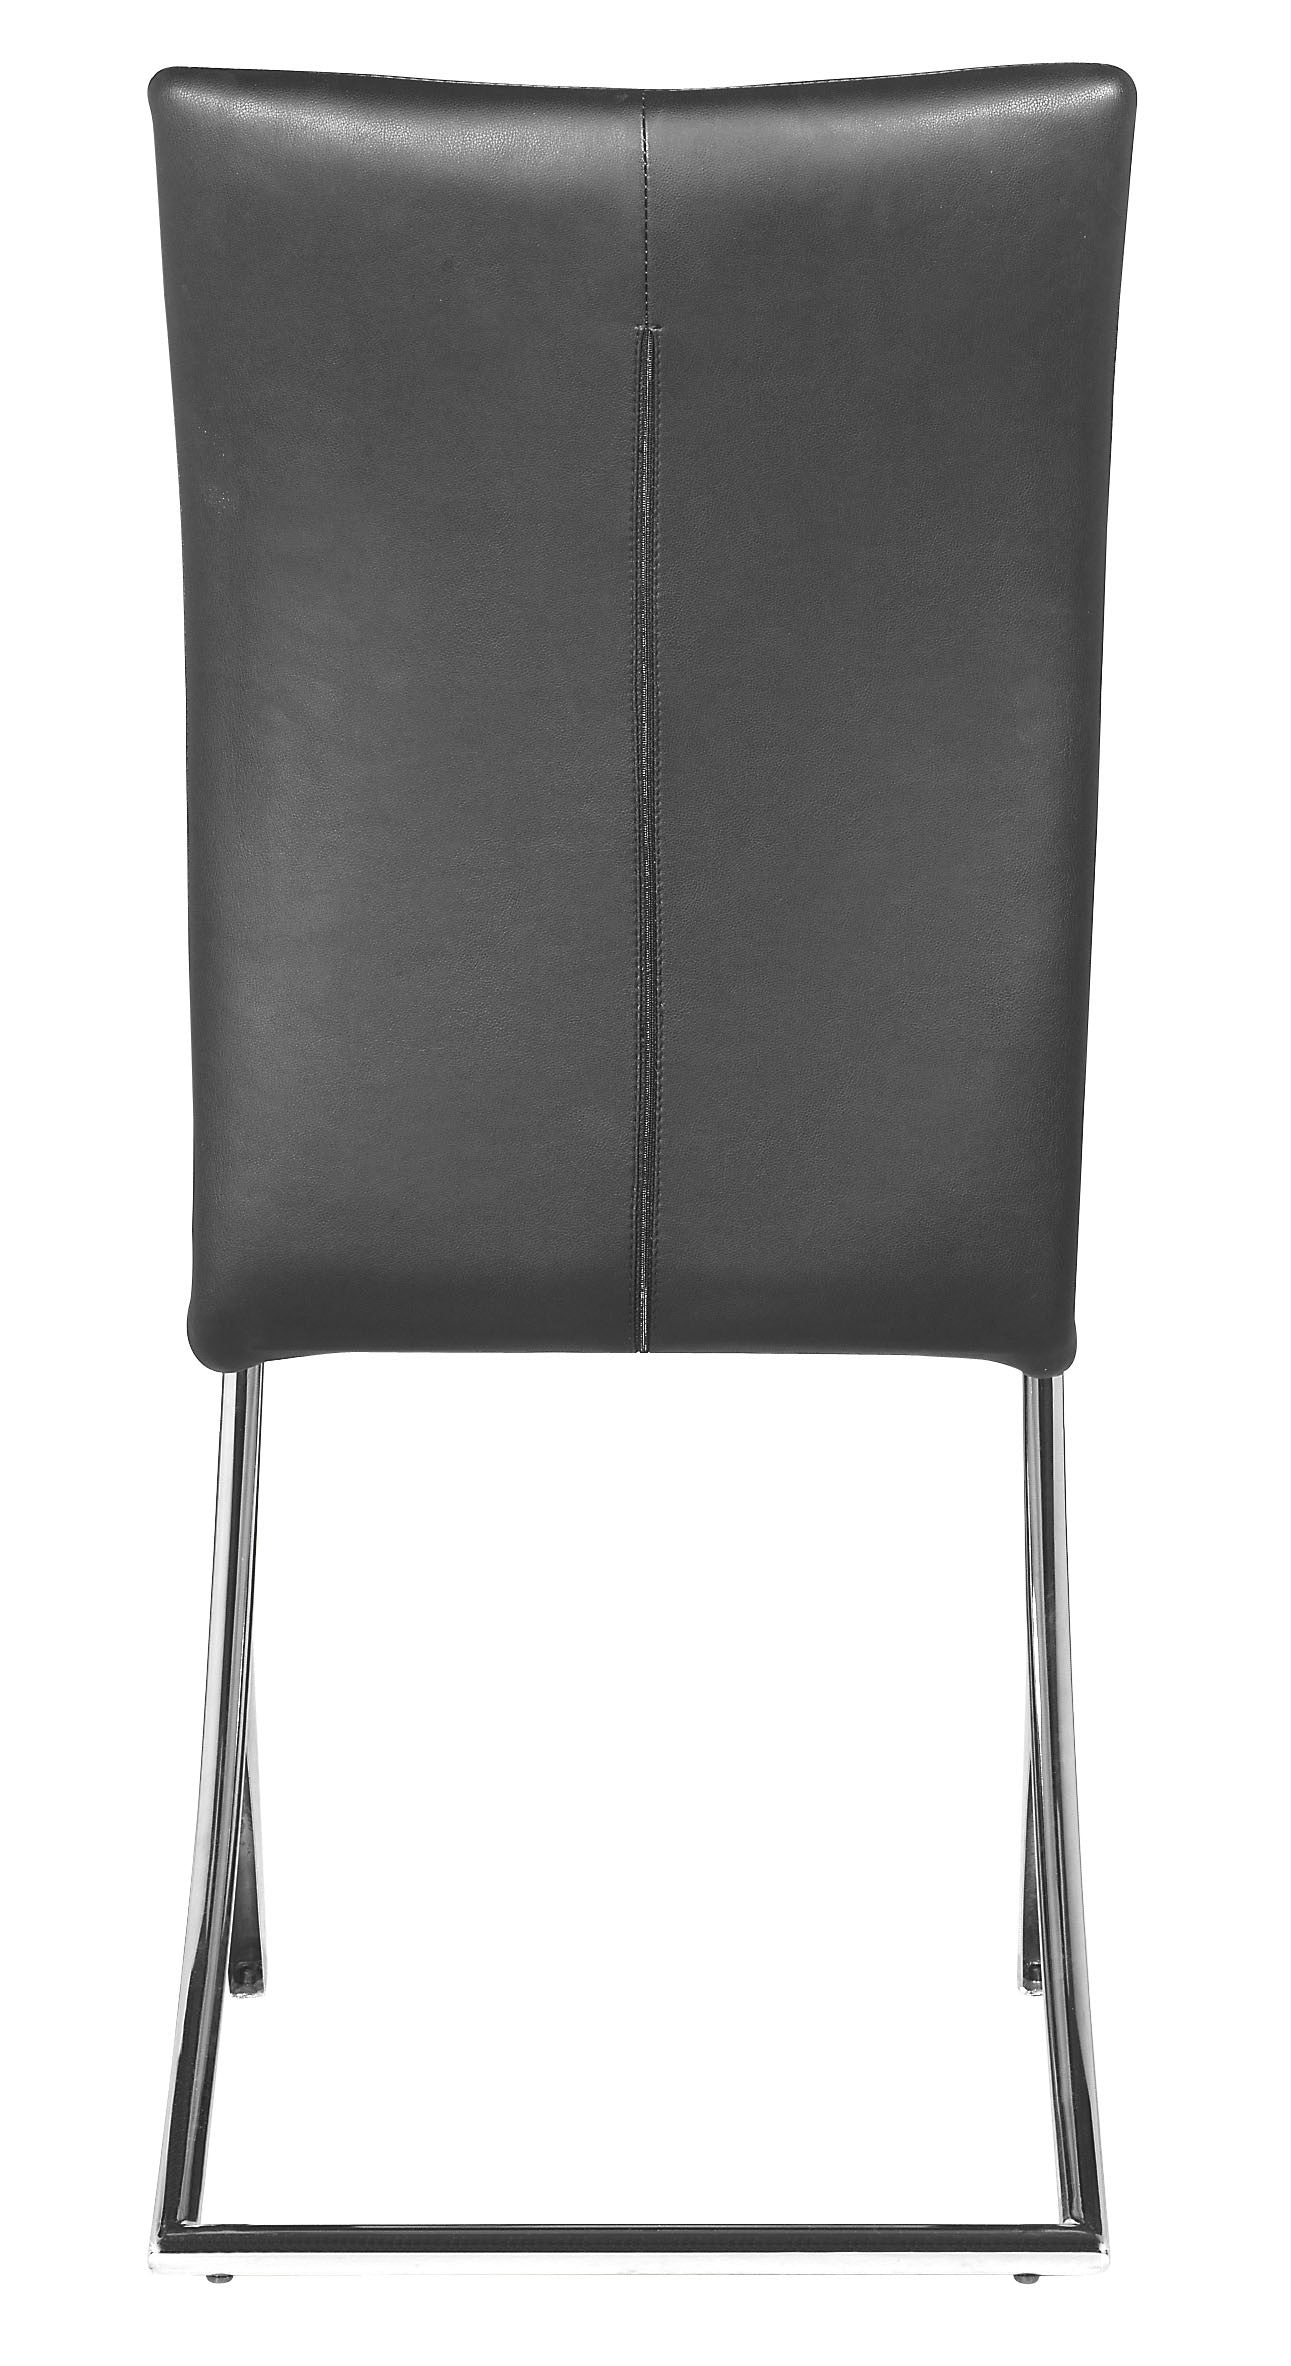 Set of Two Contempo Slim Black Faux Leather and Stainless Dining Chairs